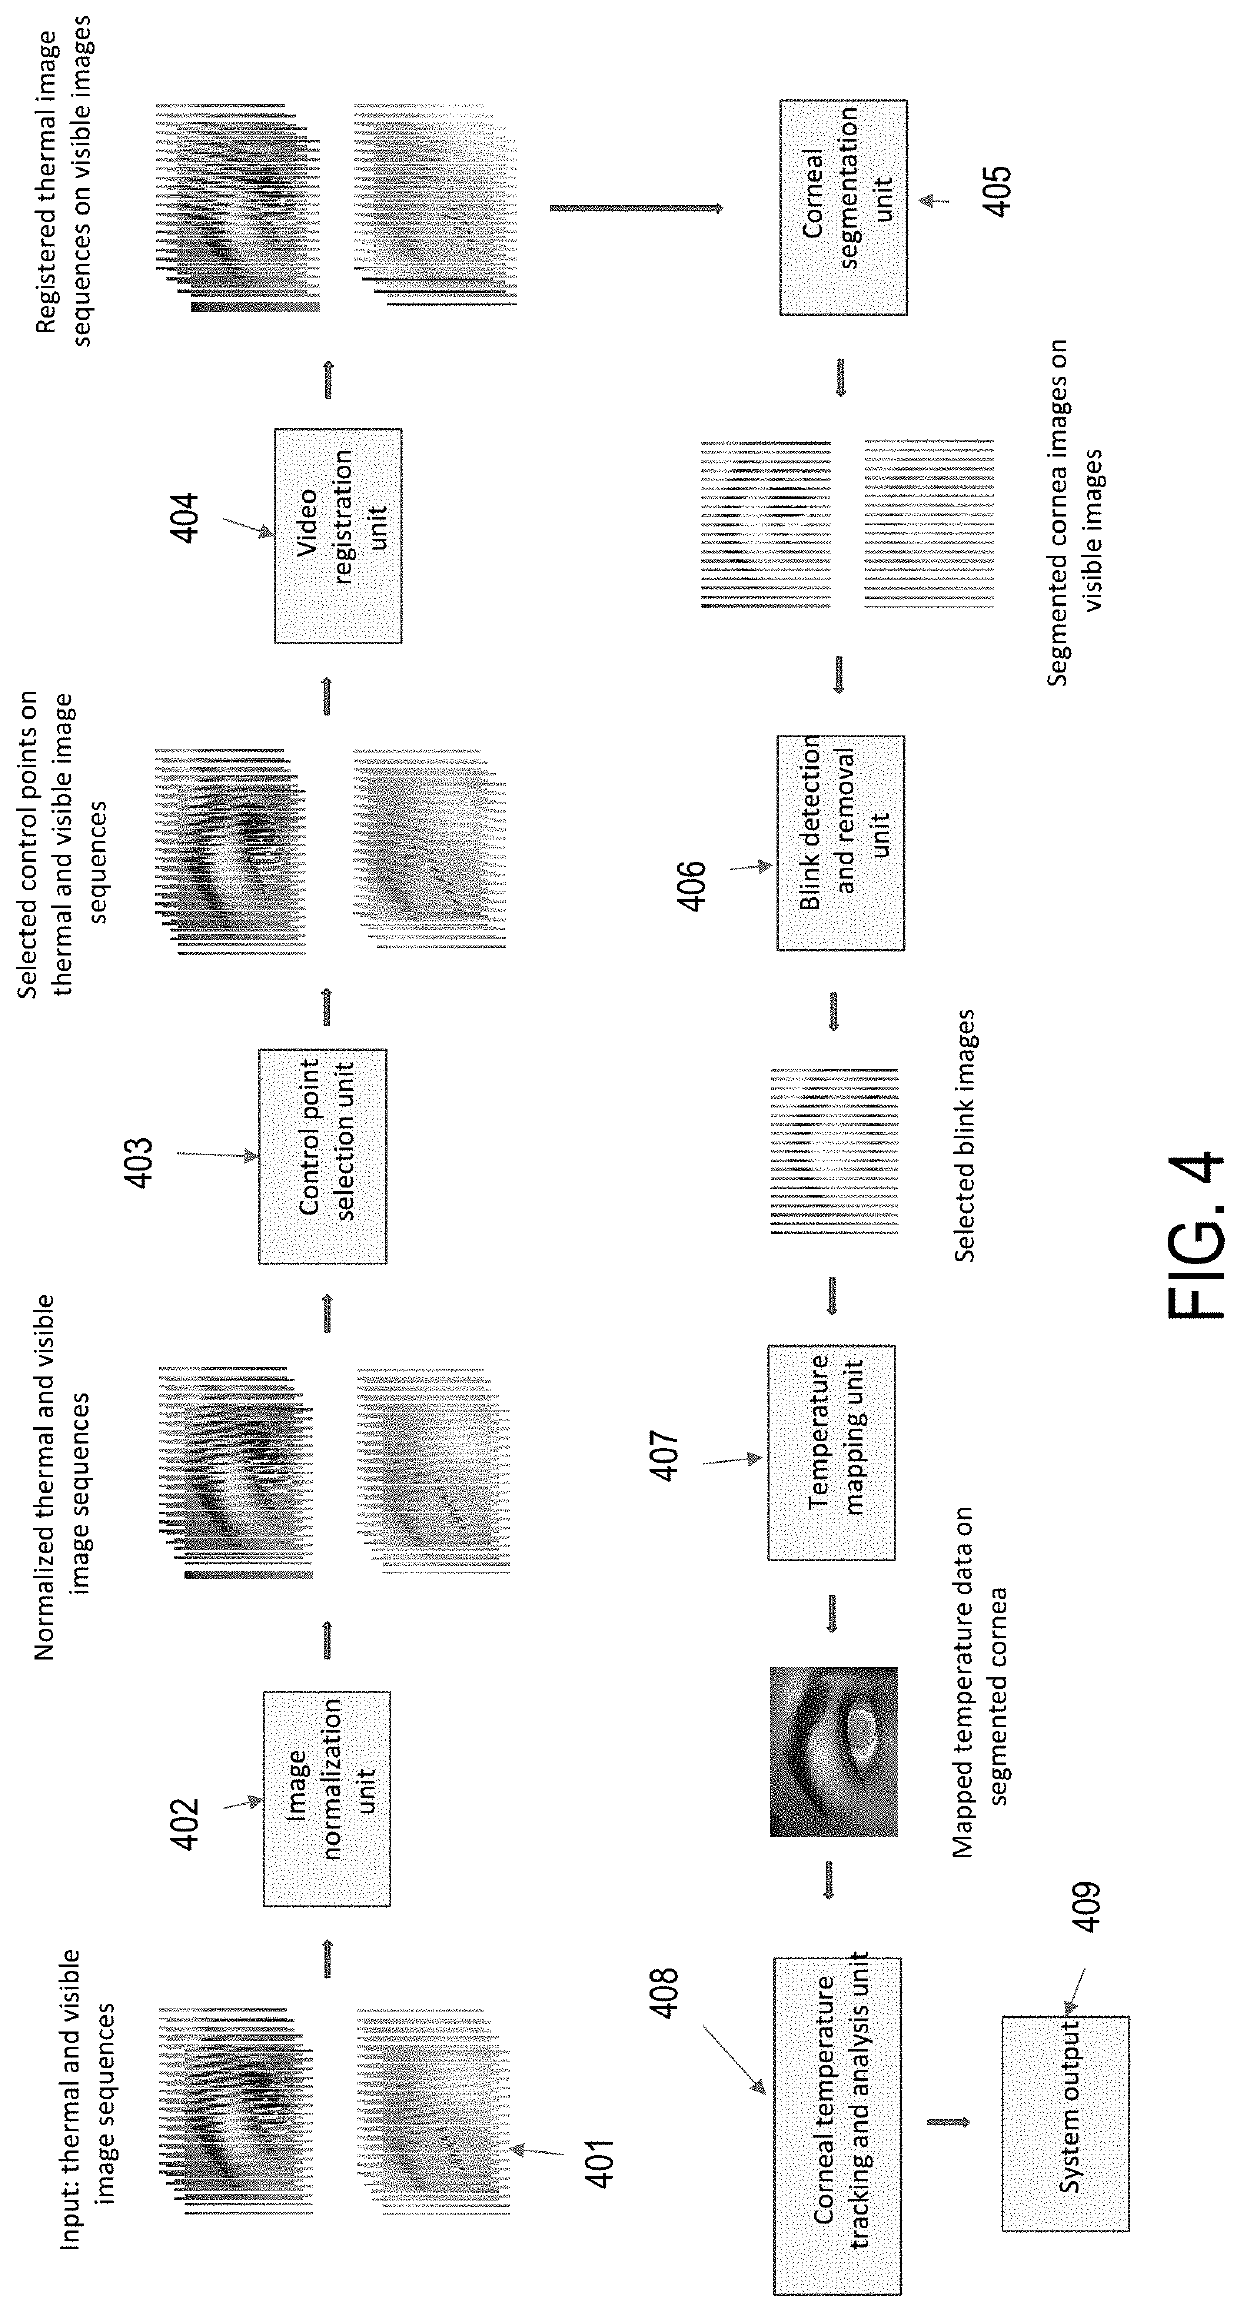 System and method for imaging, segmentation, temporal and spatial tracking, and analysis of visible and infrared images of ocular surface and eye adnexa